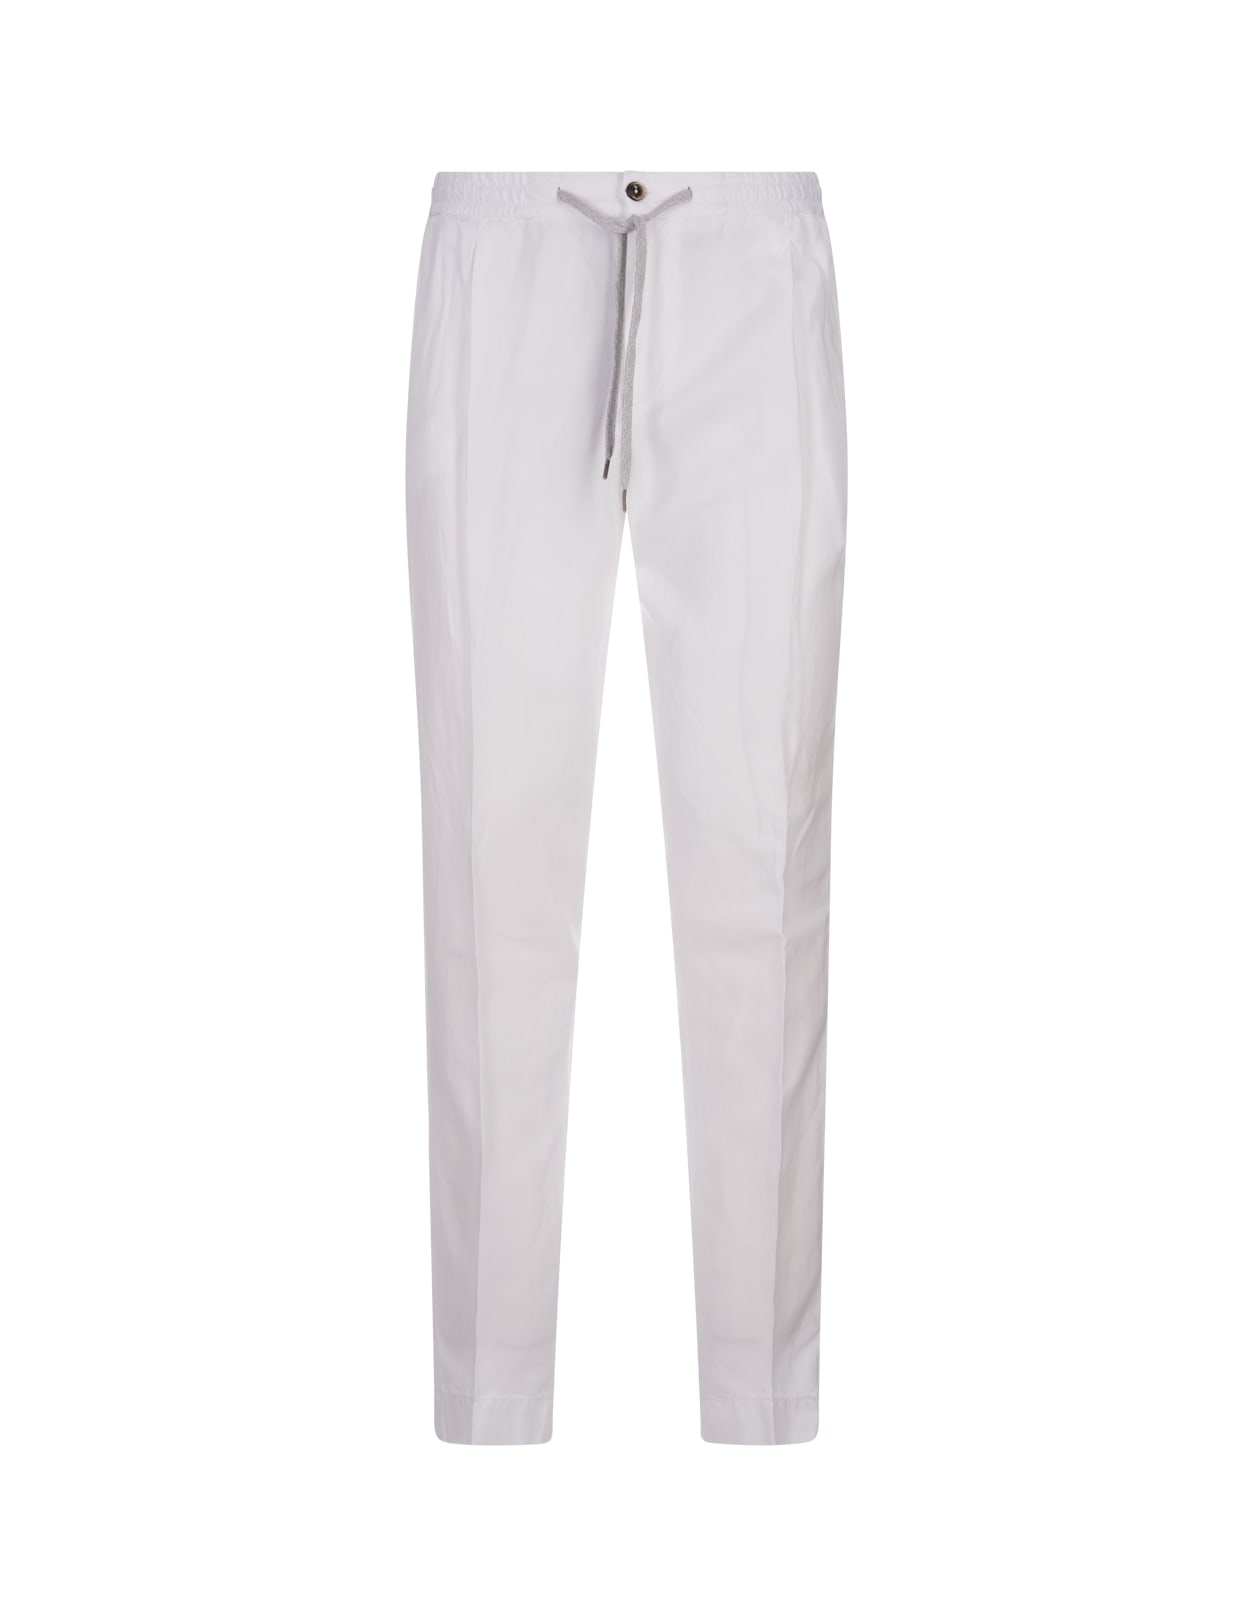 White Linen Blend Soft Fit Trousers